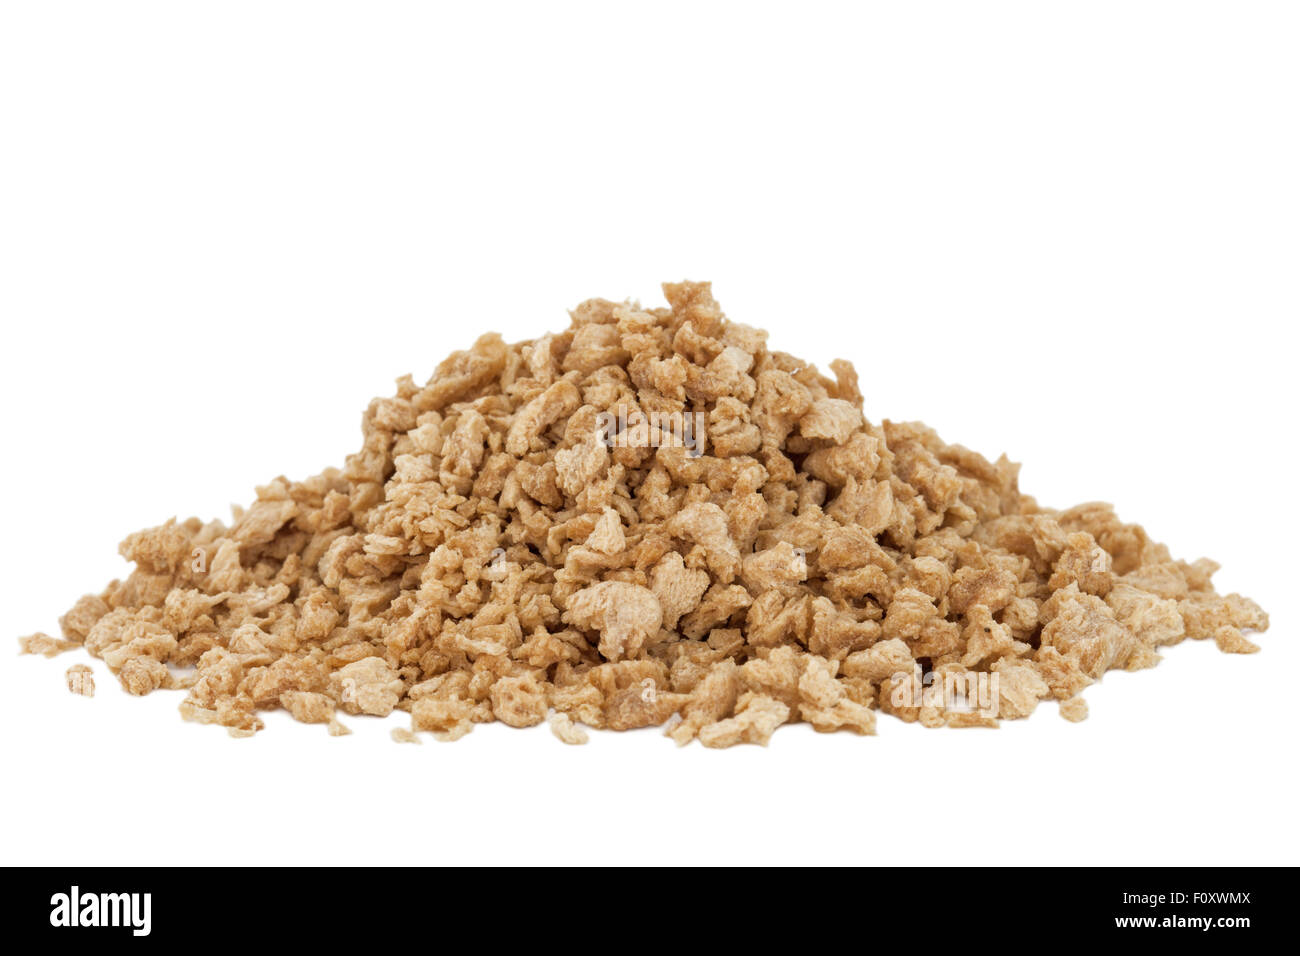 Heap of textured soy protein granules isolated on white background. Stock Photo